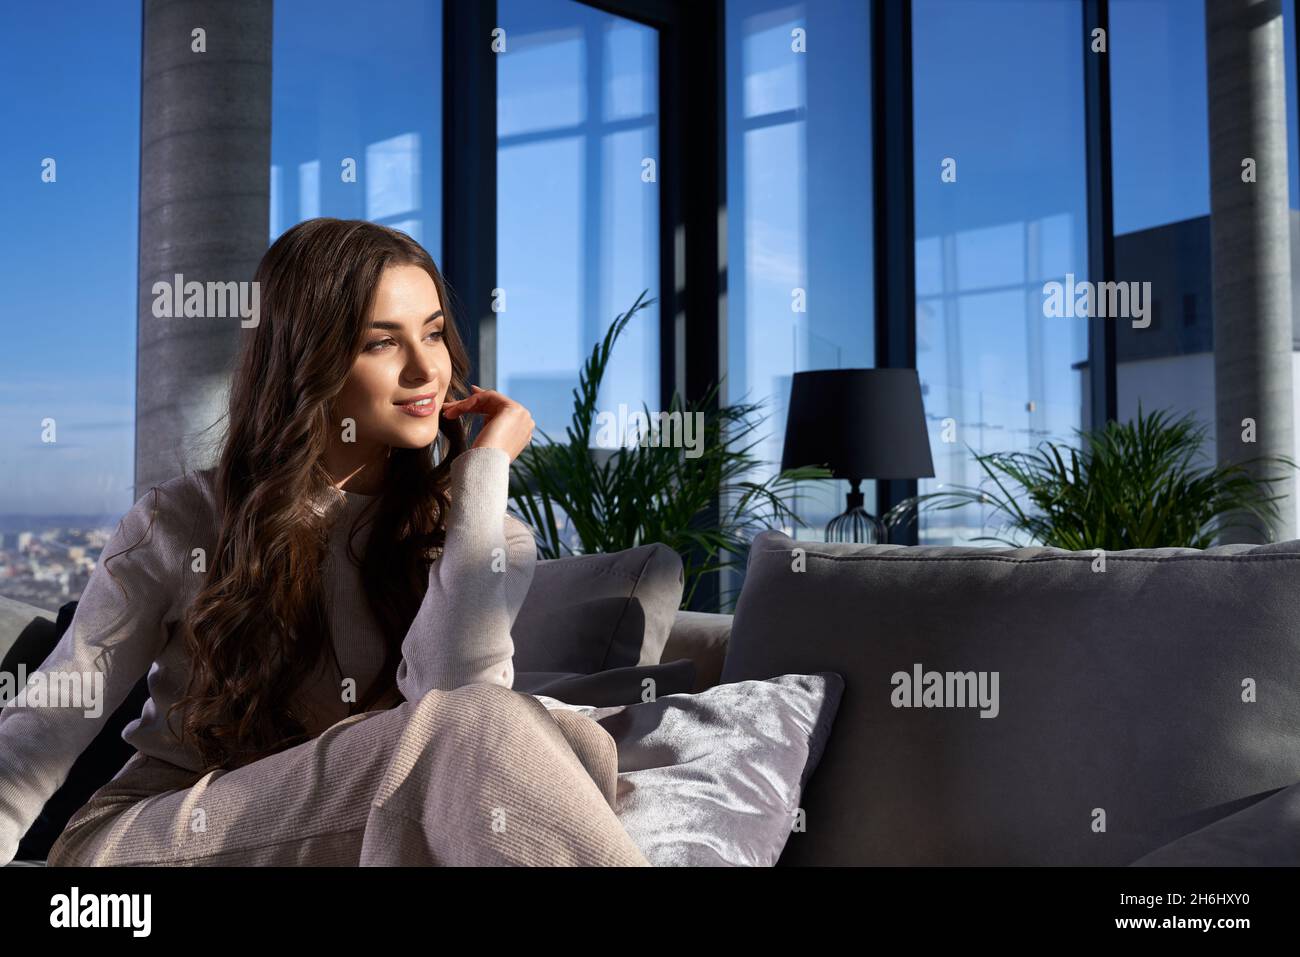 Pleasant young lady with long wavy hair smiling and looking aside while relaxing on cozy sofa with panoramic windows on background. Domestic lifestyle. Stock Photo